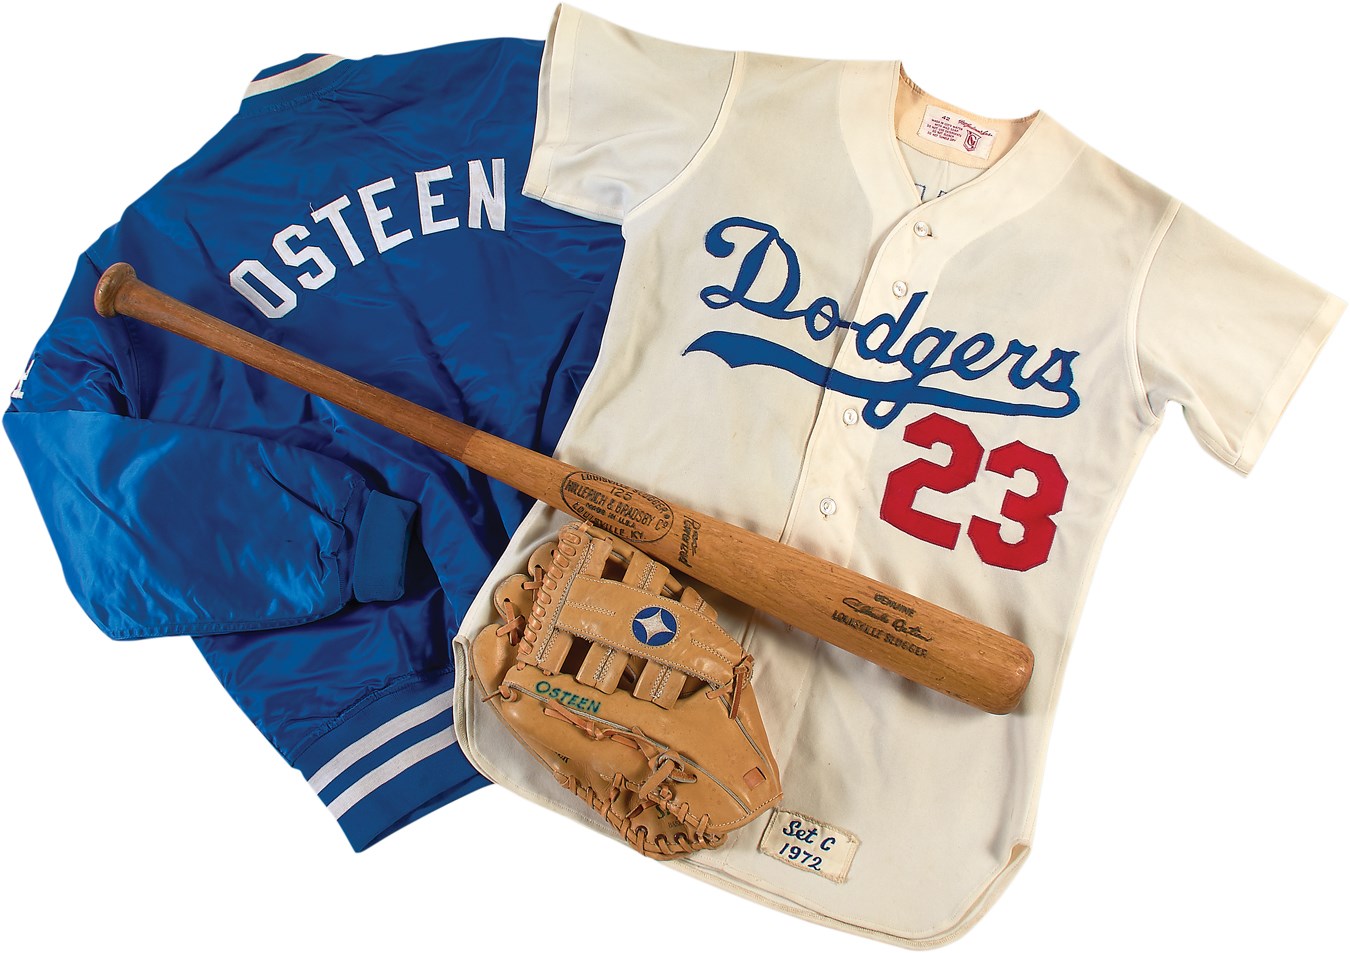 - Claude Osteen Los Angeles Dodgers Game Used Jersey, Bat, Glove & Jacket